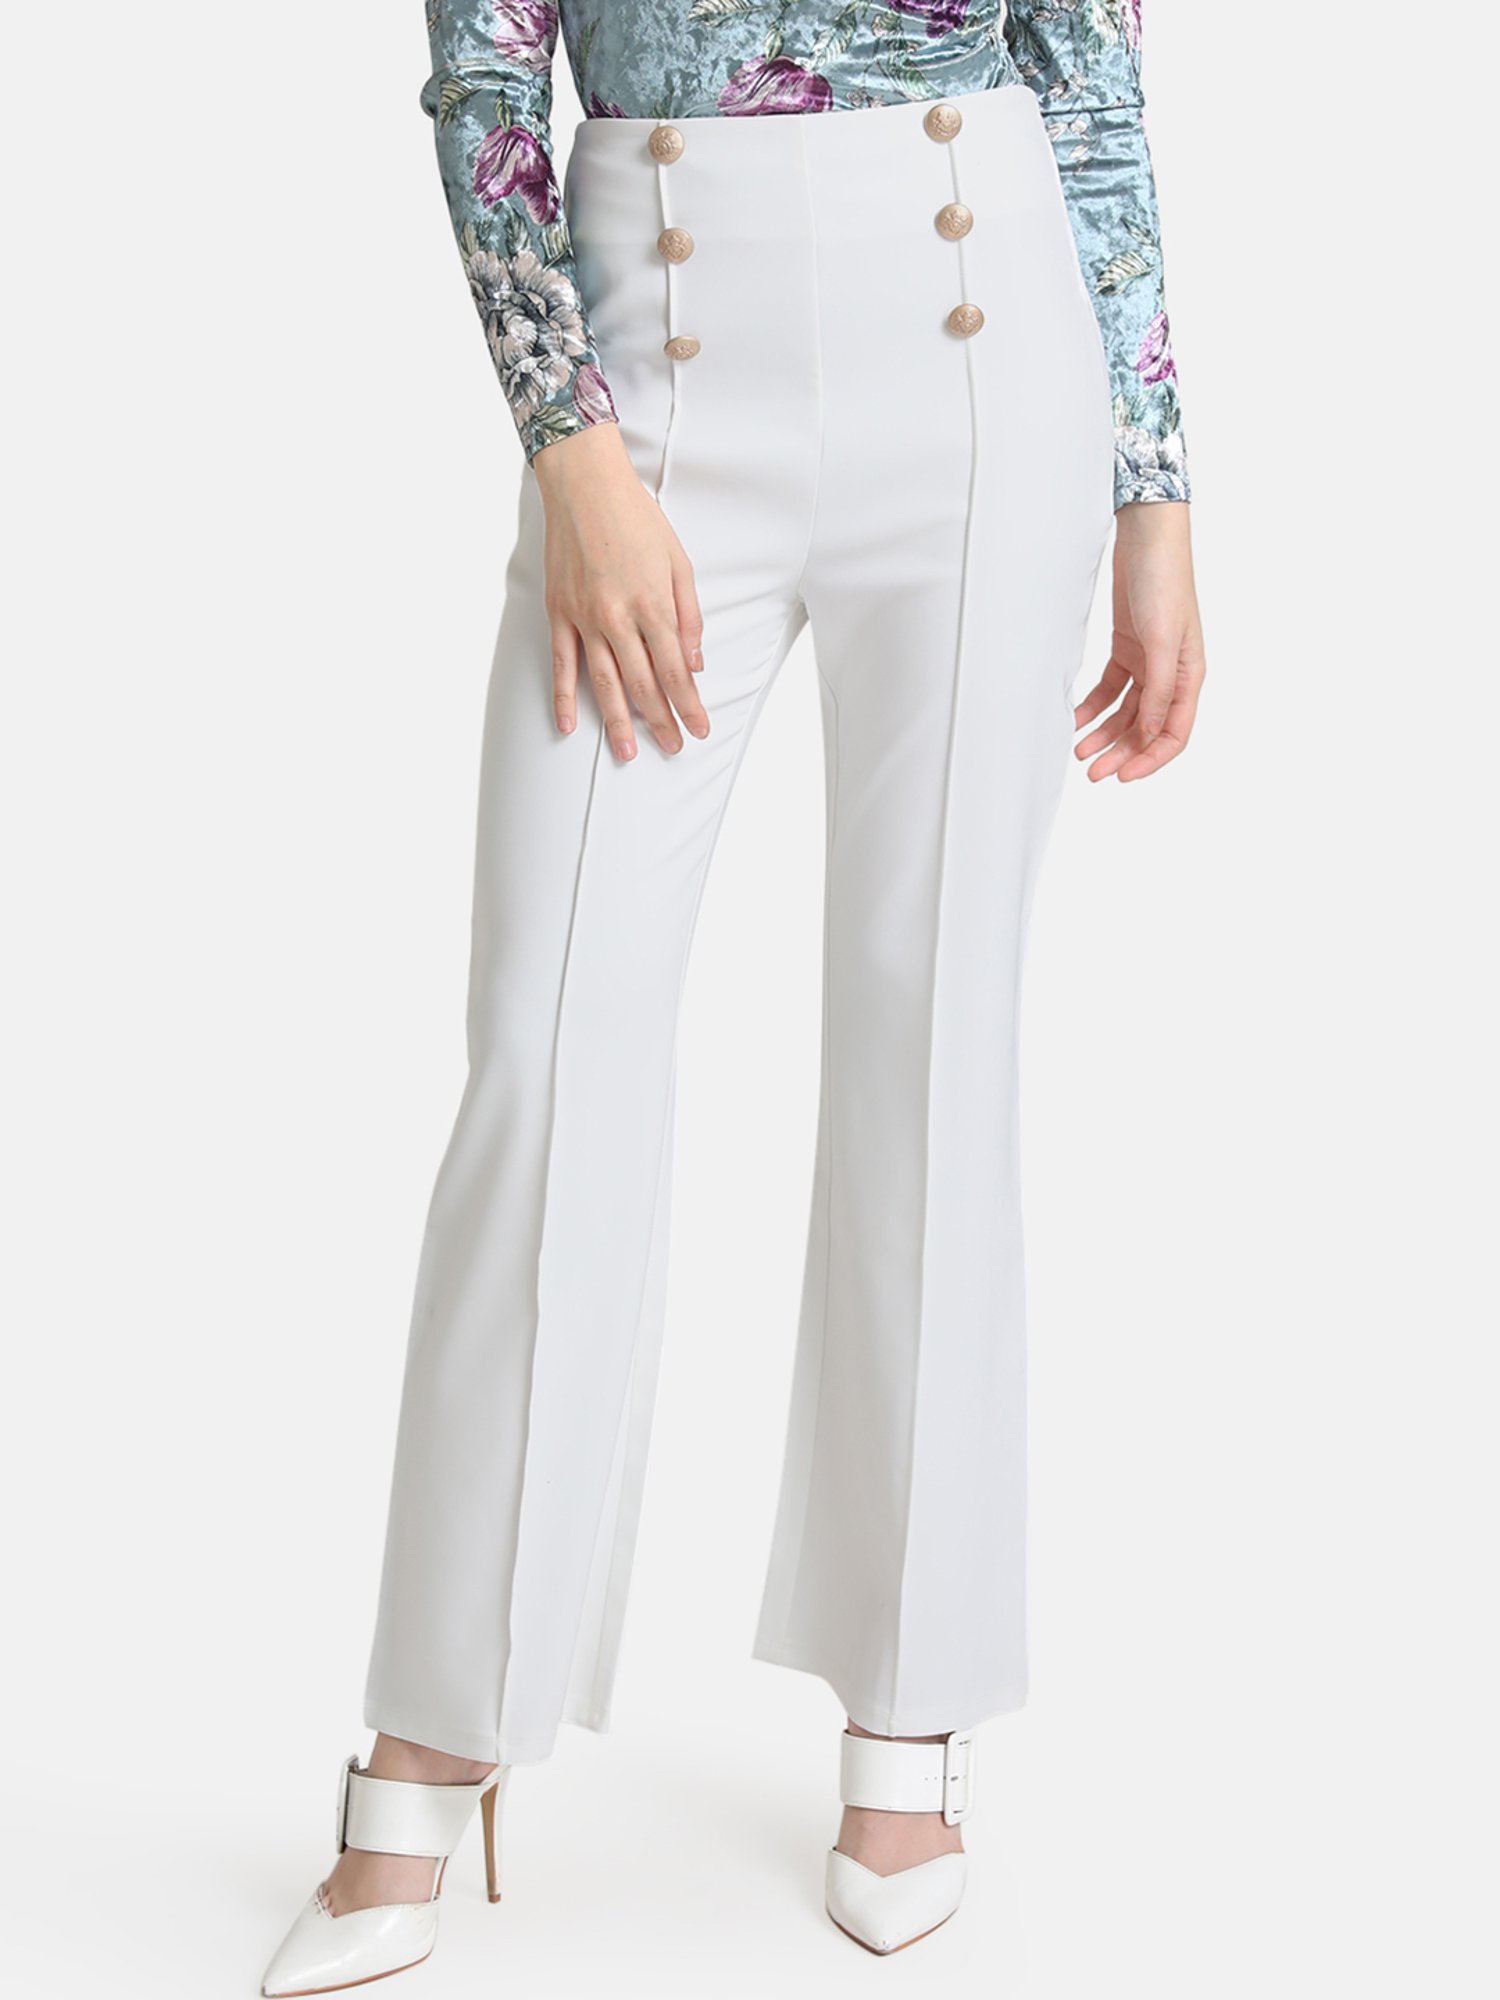 Buy The Dapper Lady MidRise Flared Pants  White Color Women  AJIO LUXE